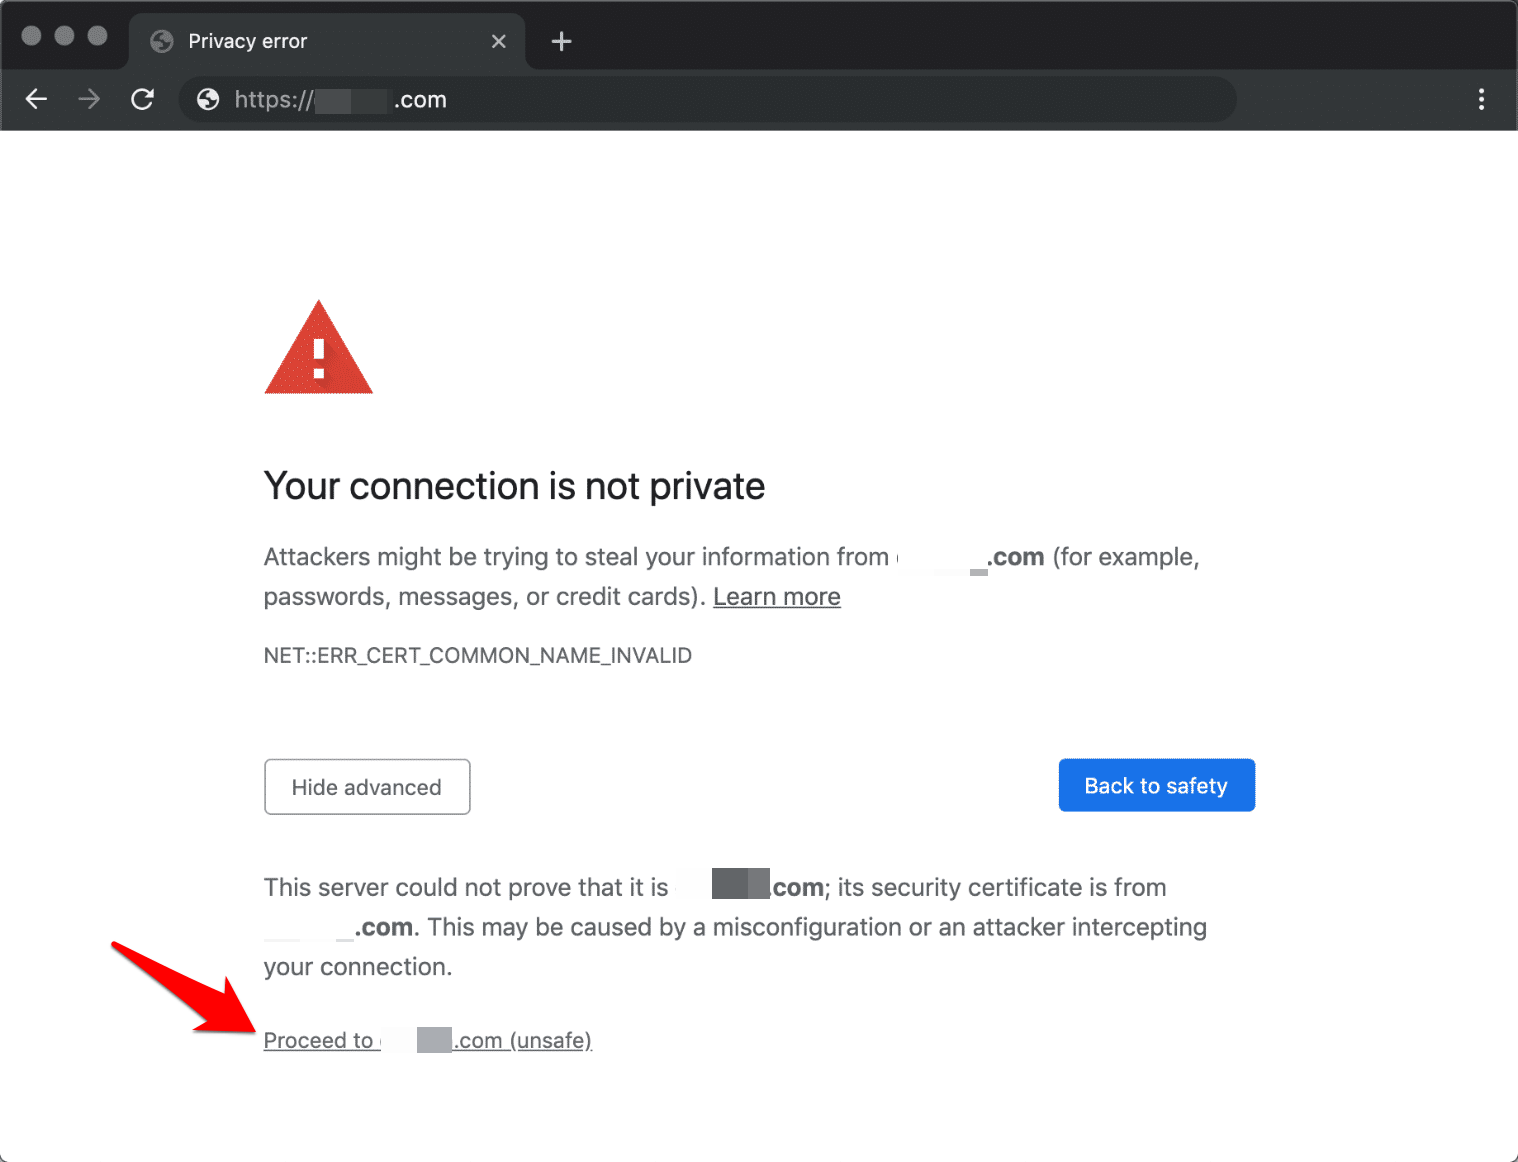 Proceed to insecure site with connection not private error